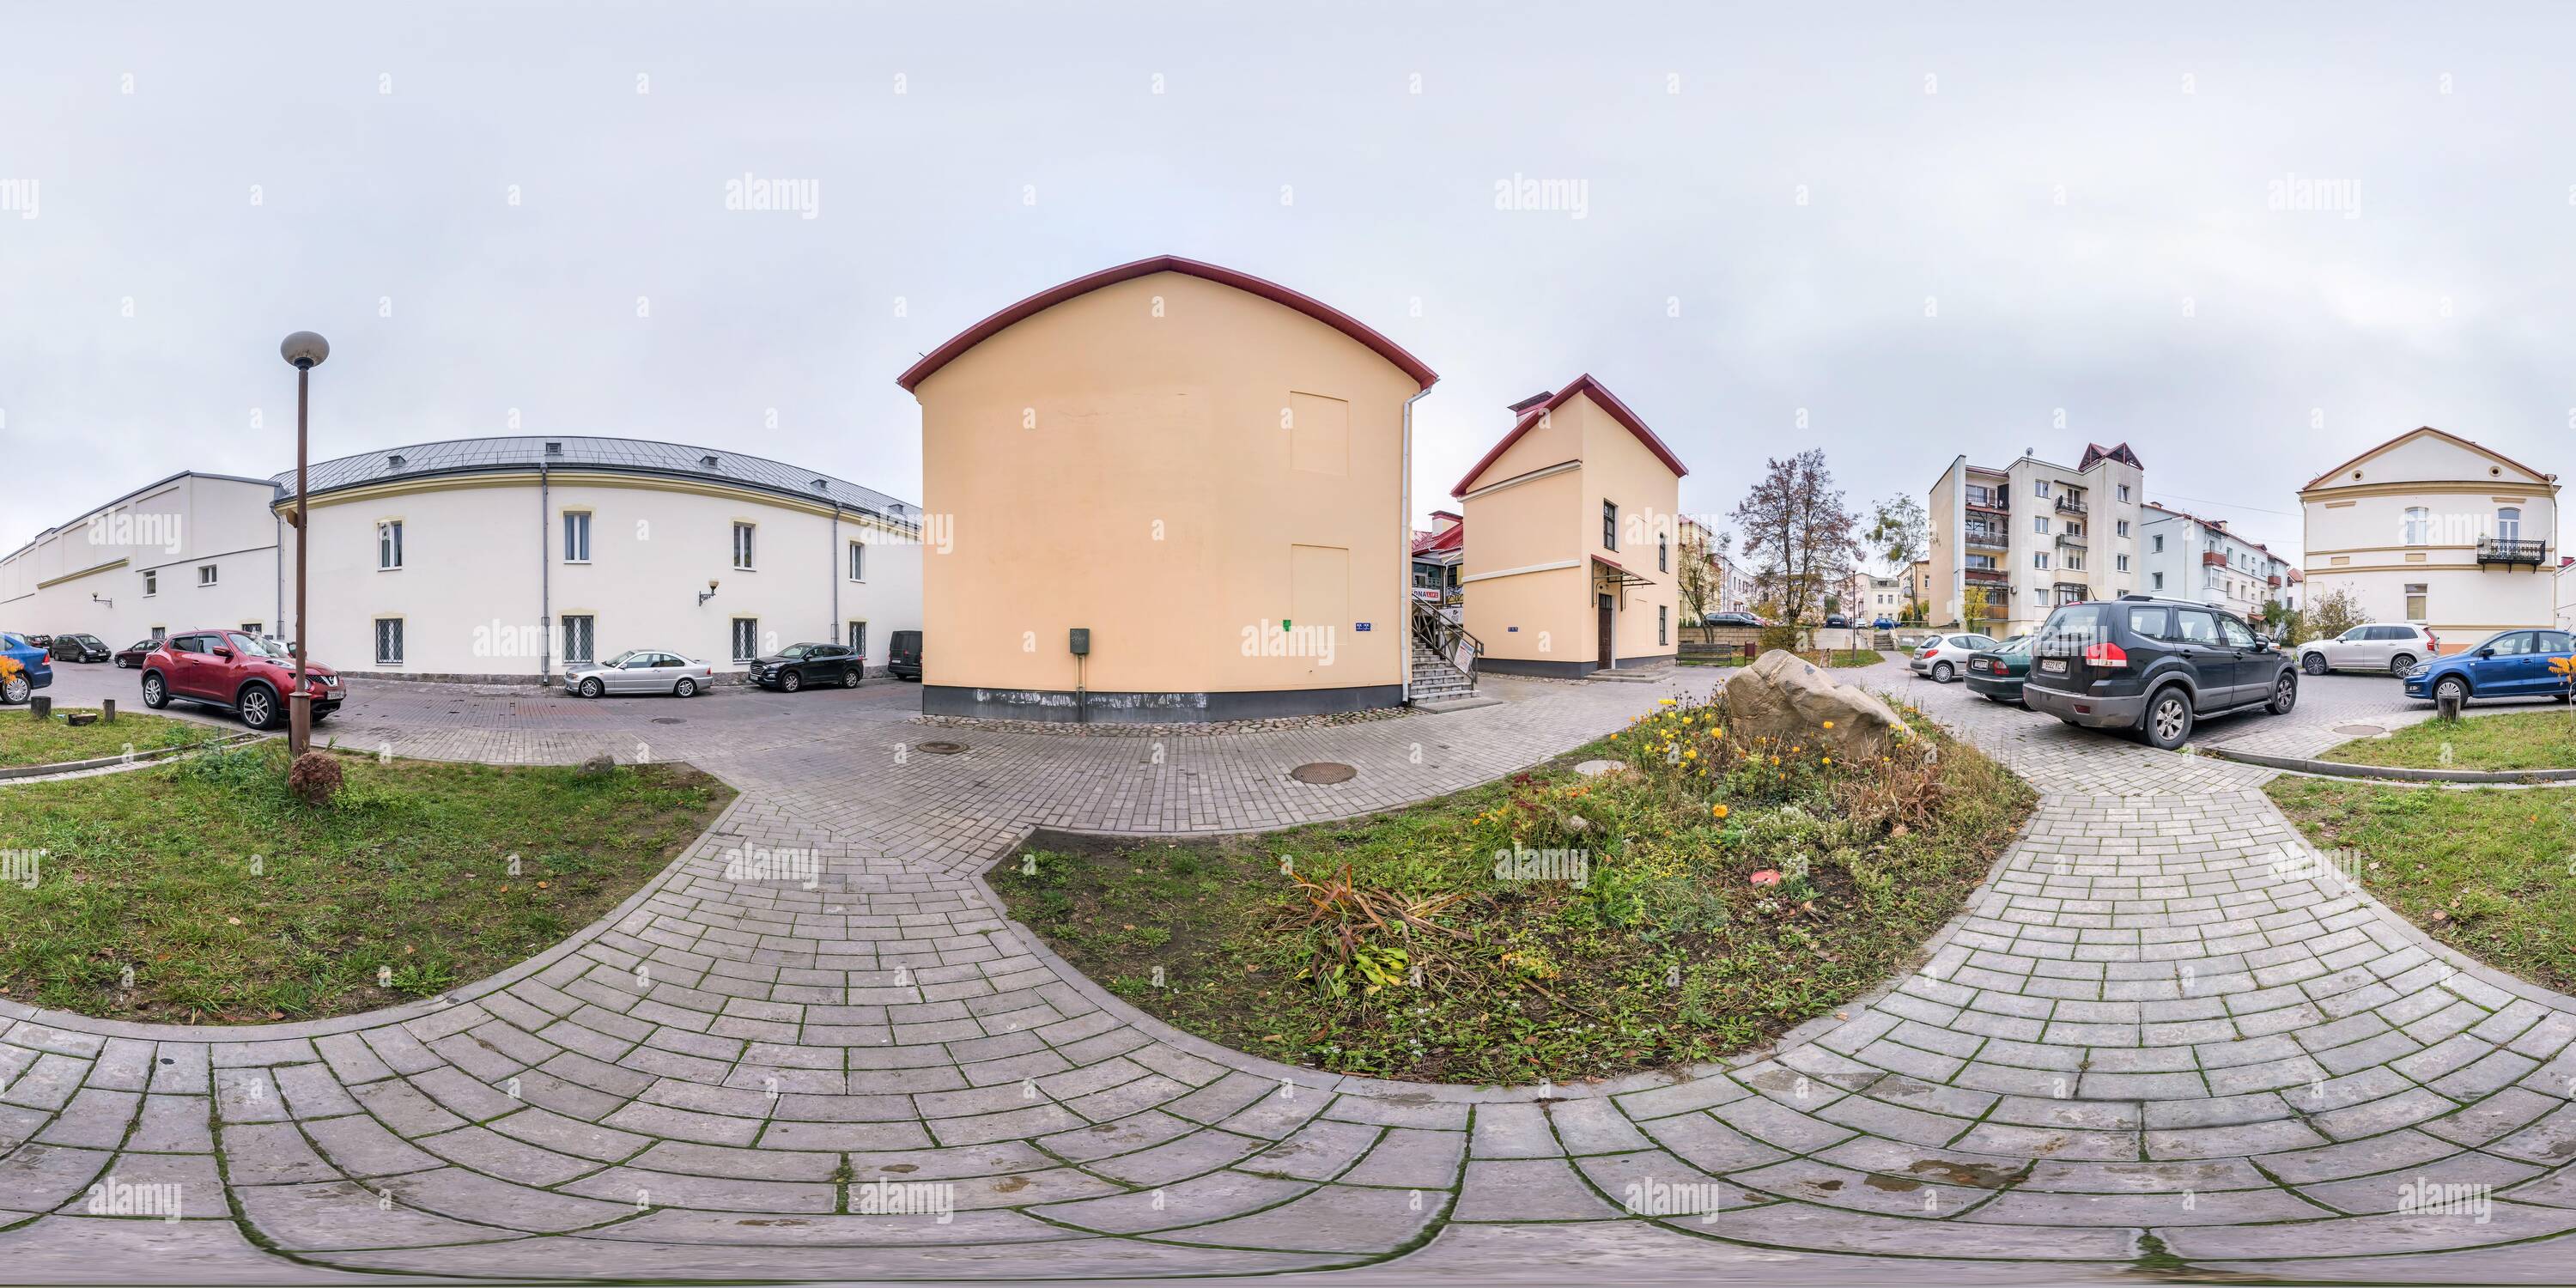 360 degree panoramic view of GRODNO, BELARUS -  NOVEMBER 2020: full seamless spherical hdri panorama 360 degrees angle near old houses in city bystreet near parking in equirectang